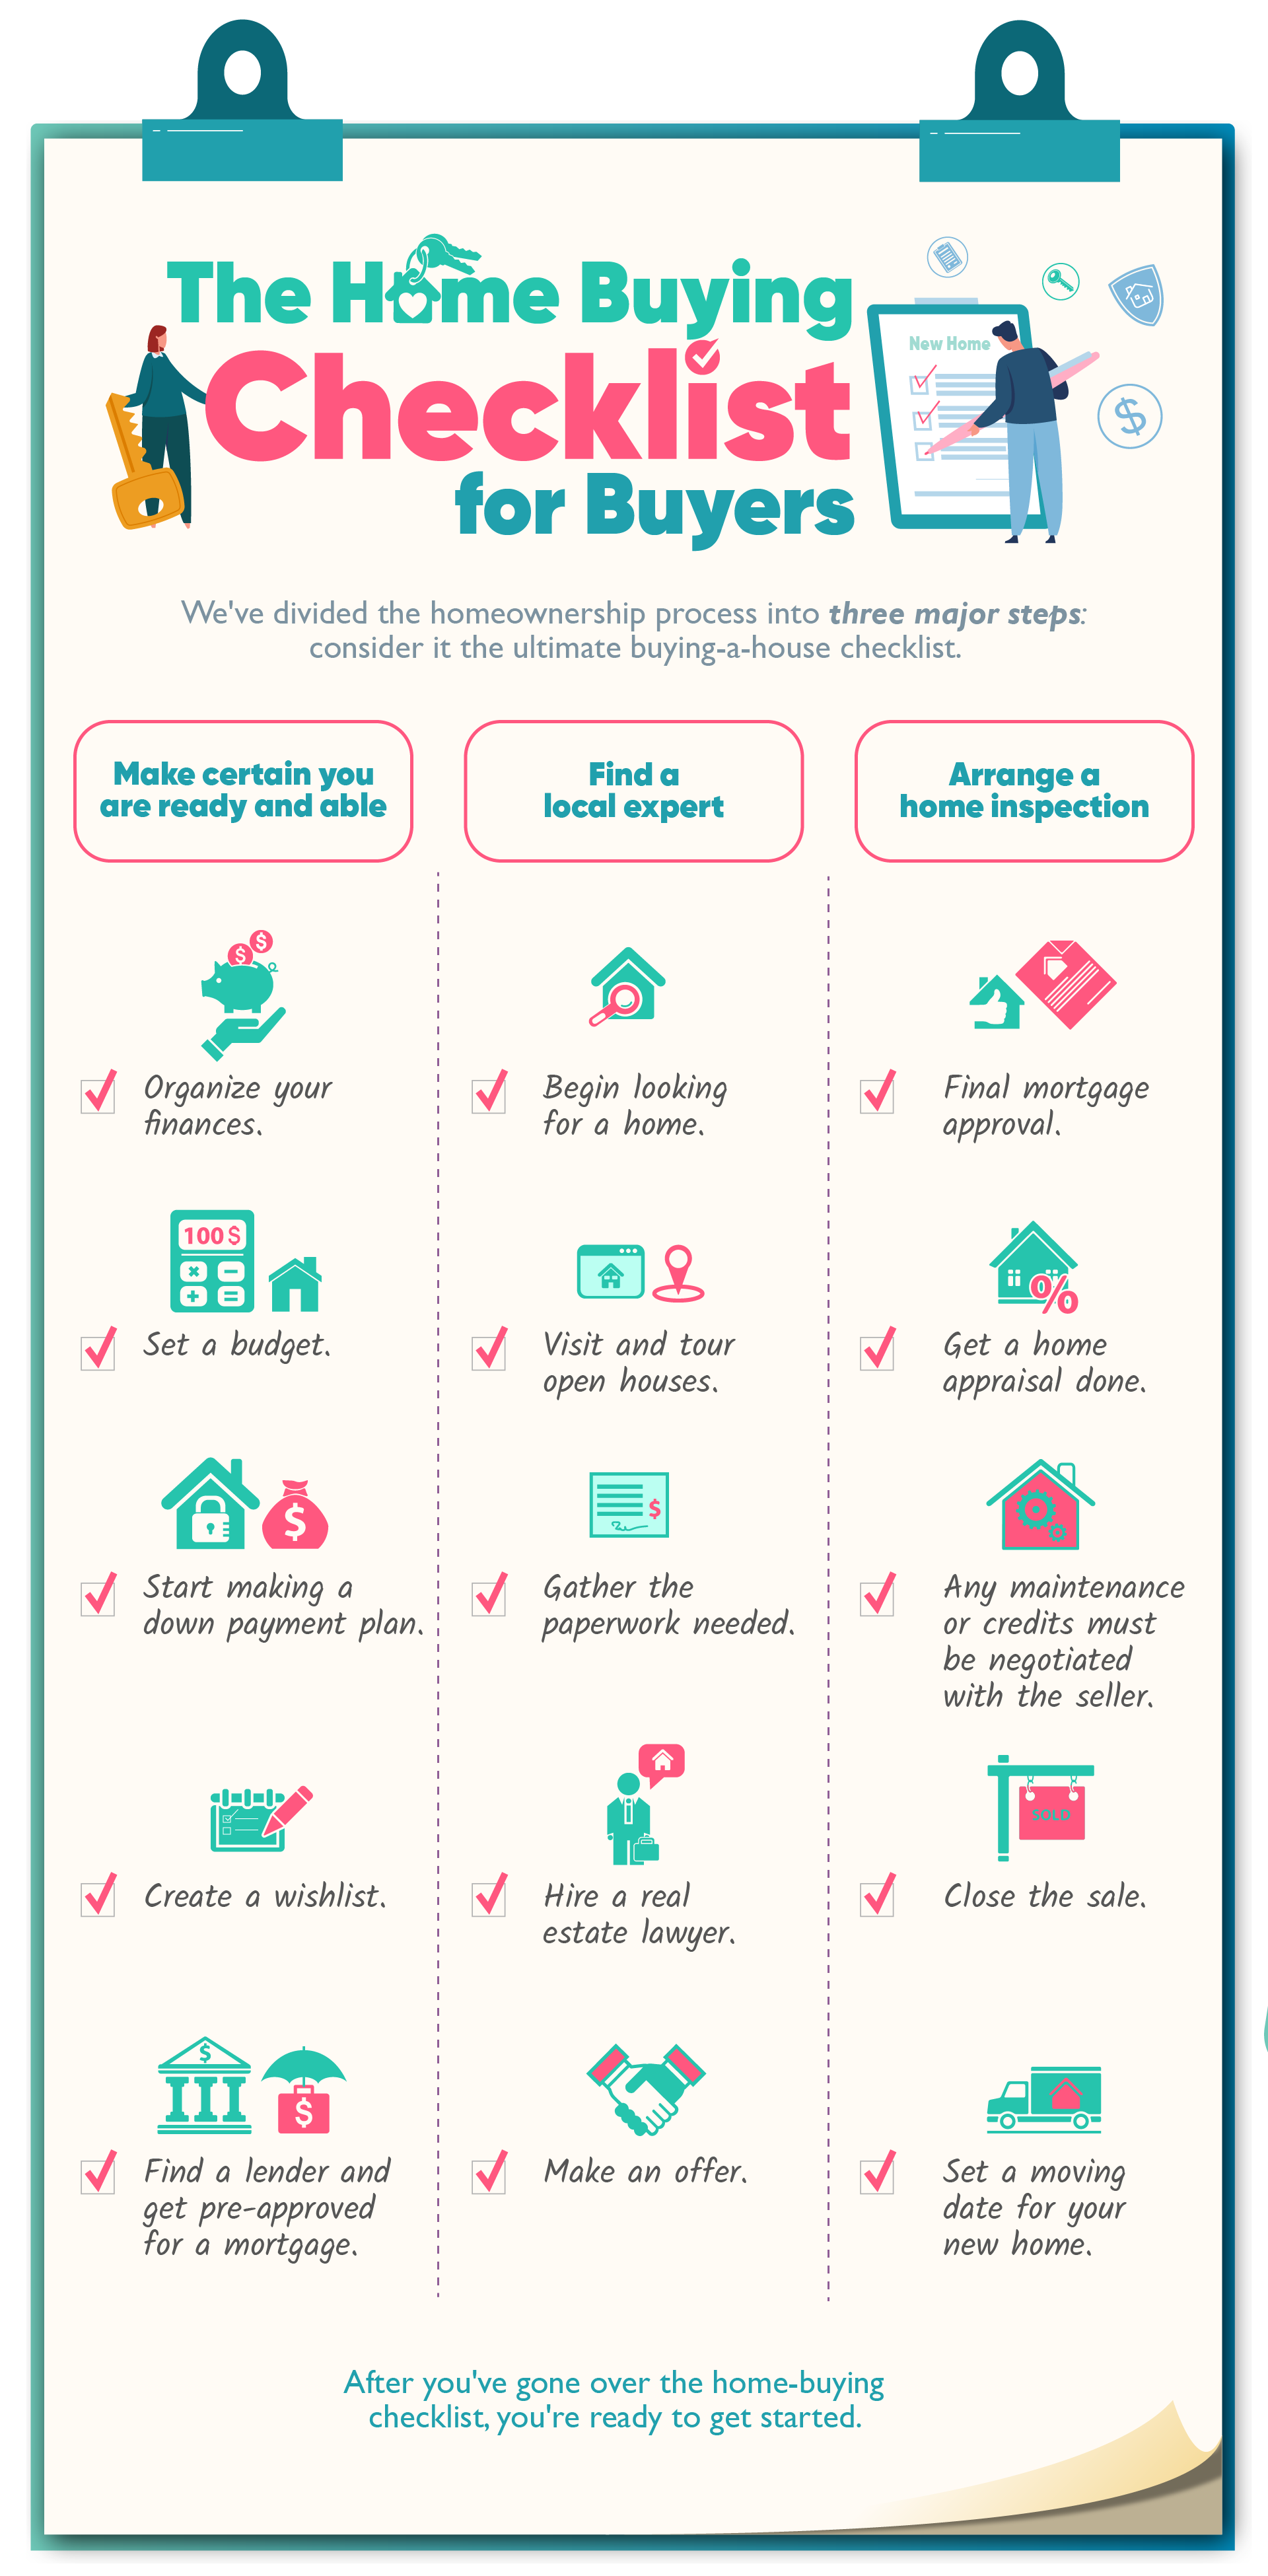 The Home Buying Checklist for Buyers